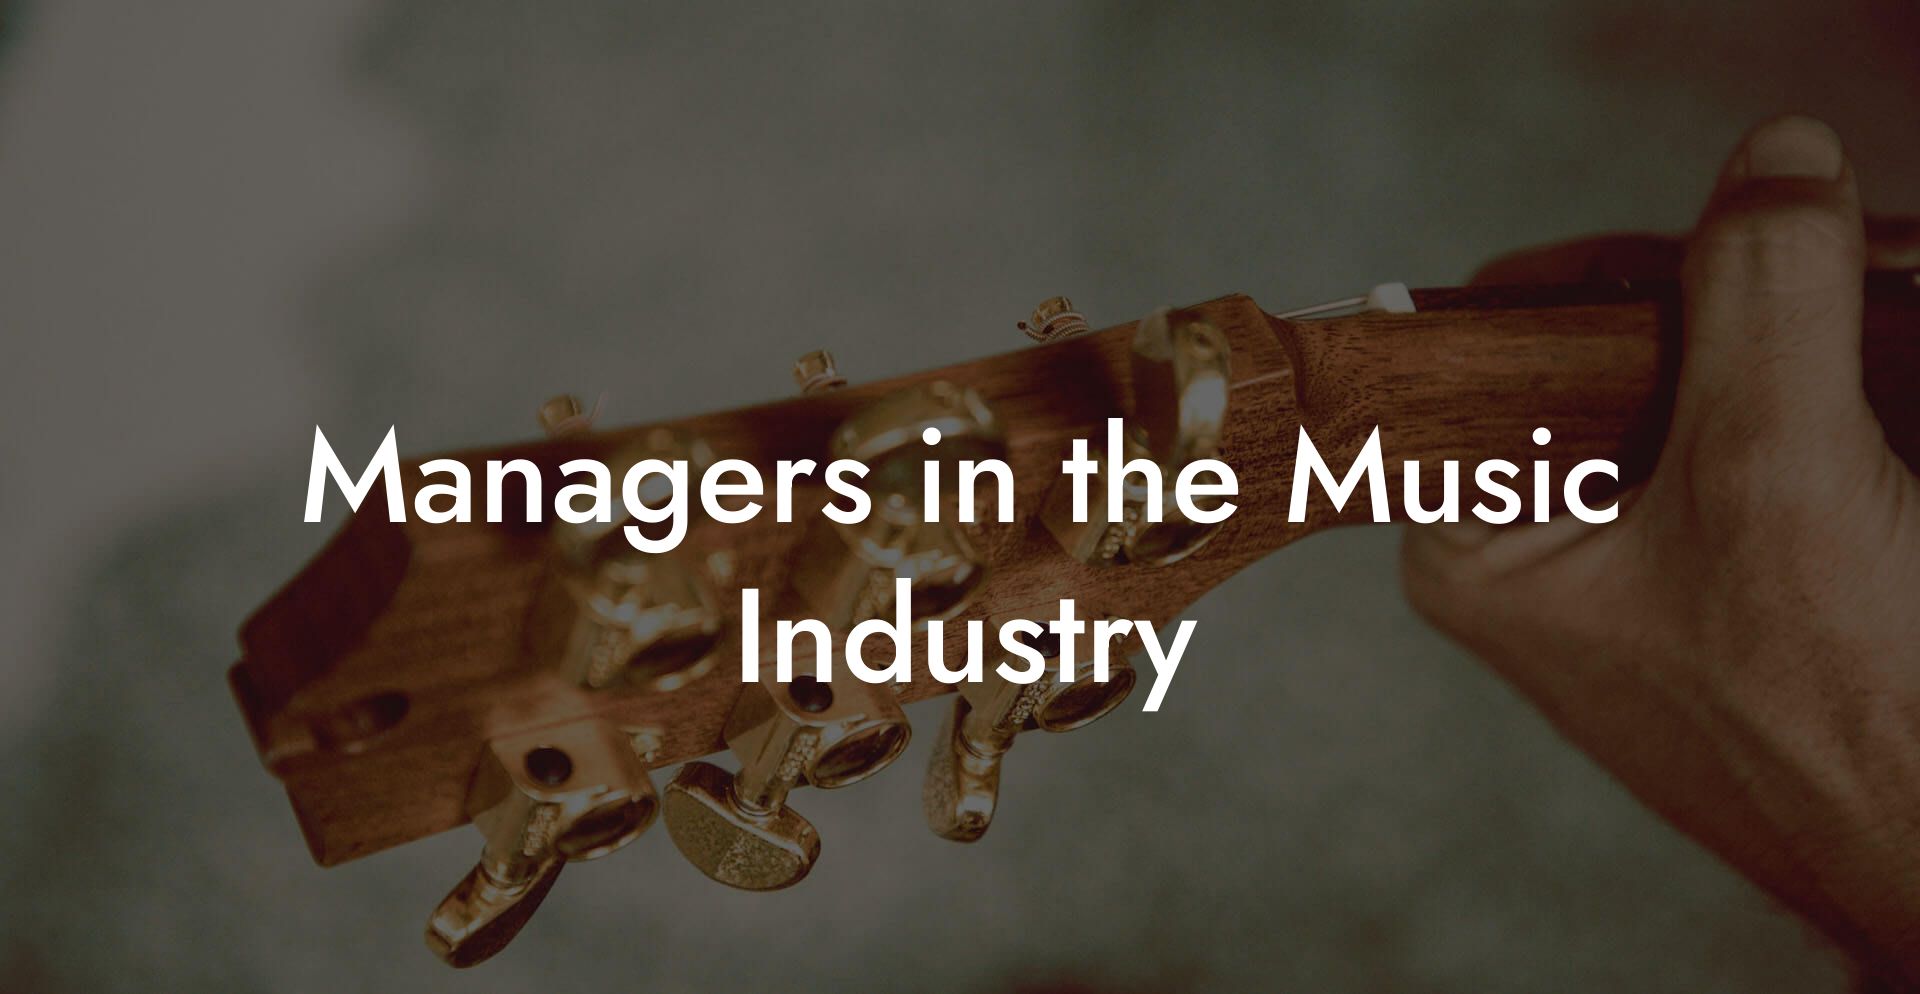 Managers in the Music Industry